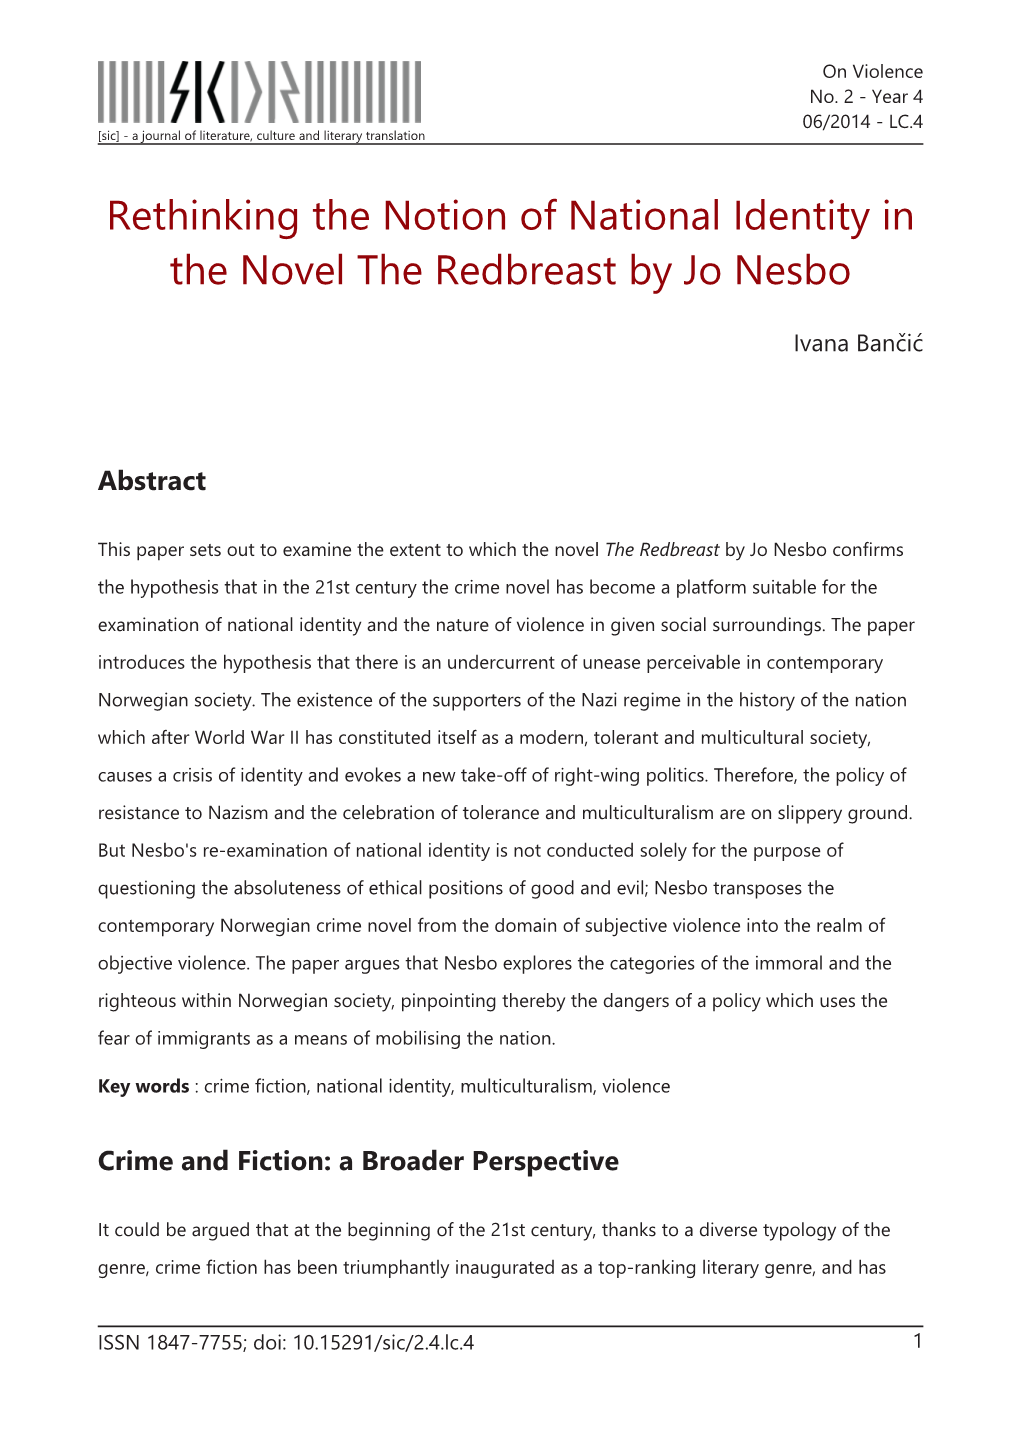 Rethinking the Notion of National Identity in the Novel the Redbreast by Jo Nesbo